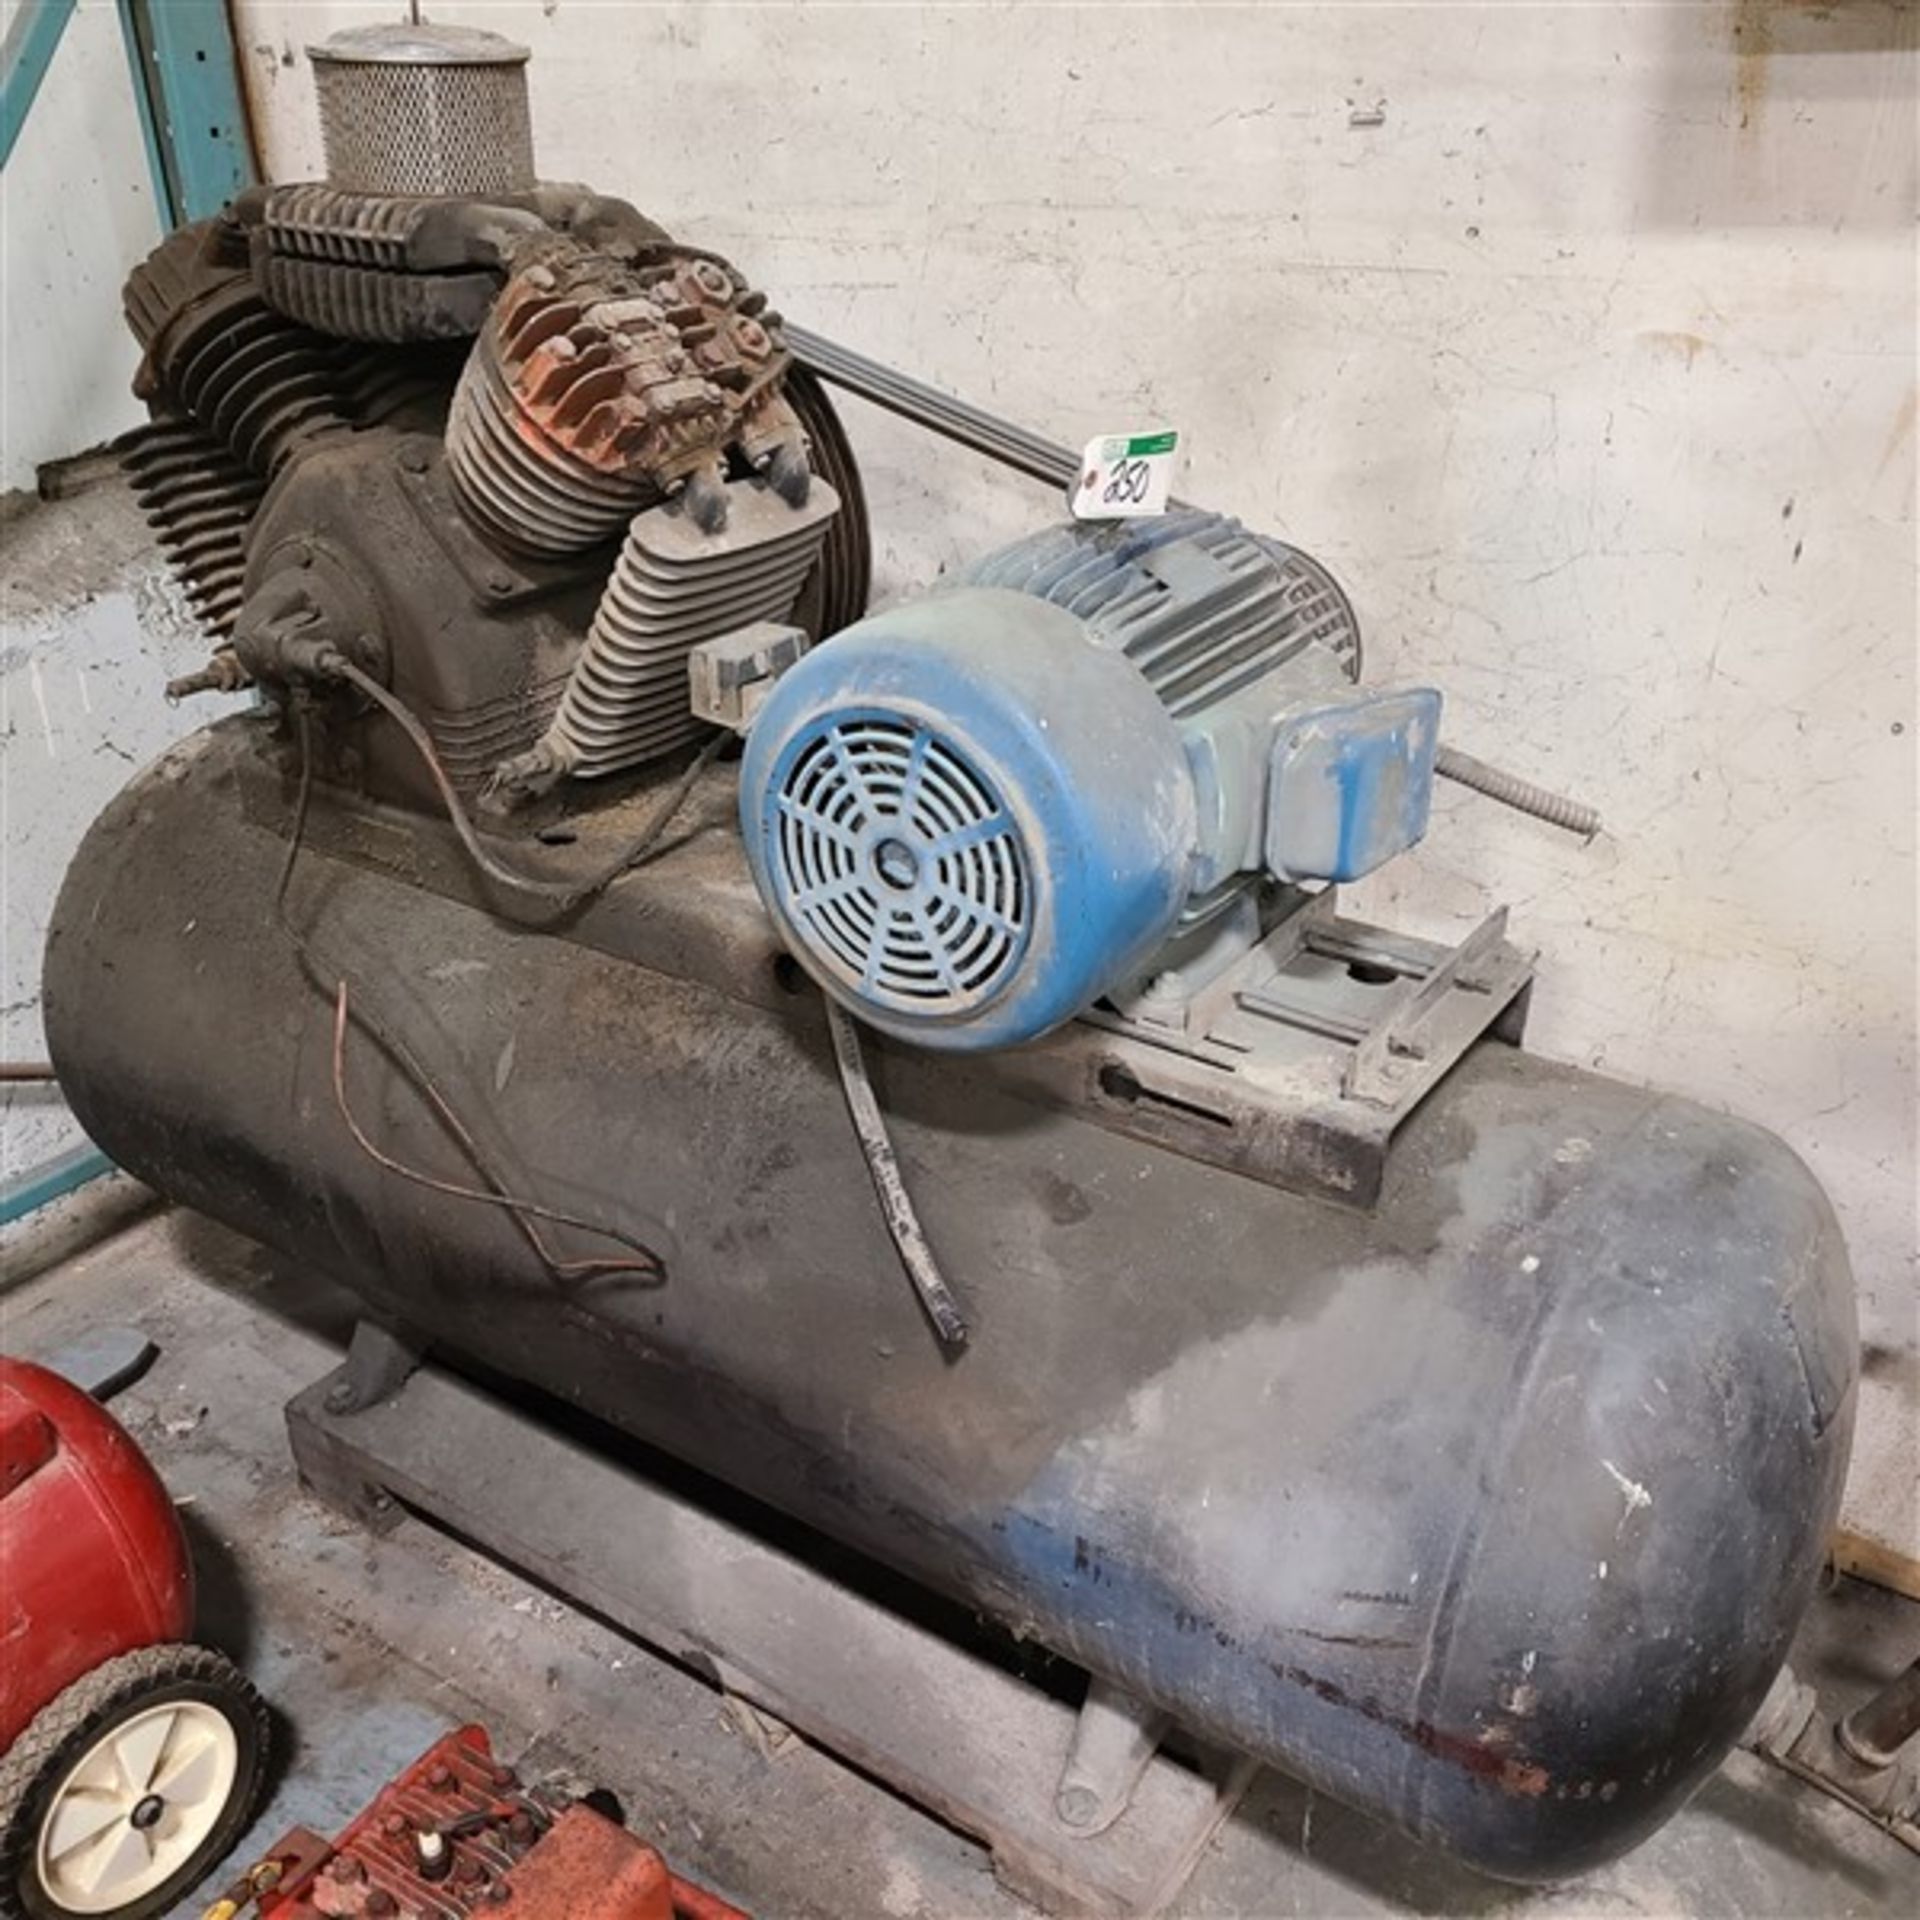 DEVILBISS SHOP COMPRESSOR, 15HP/230/460/3PH (WAS OPERATING AT TIME OF DISCONNECT)